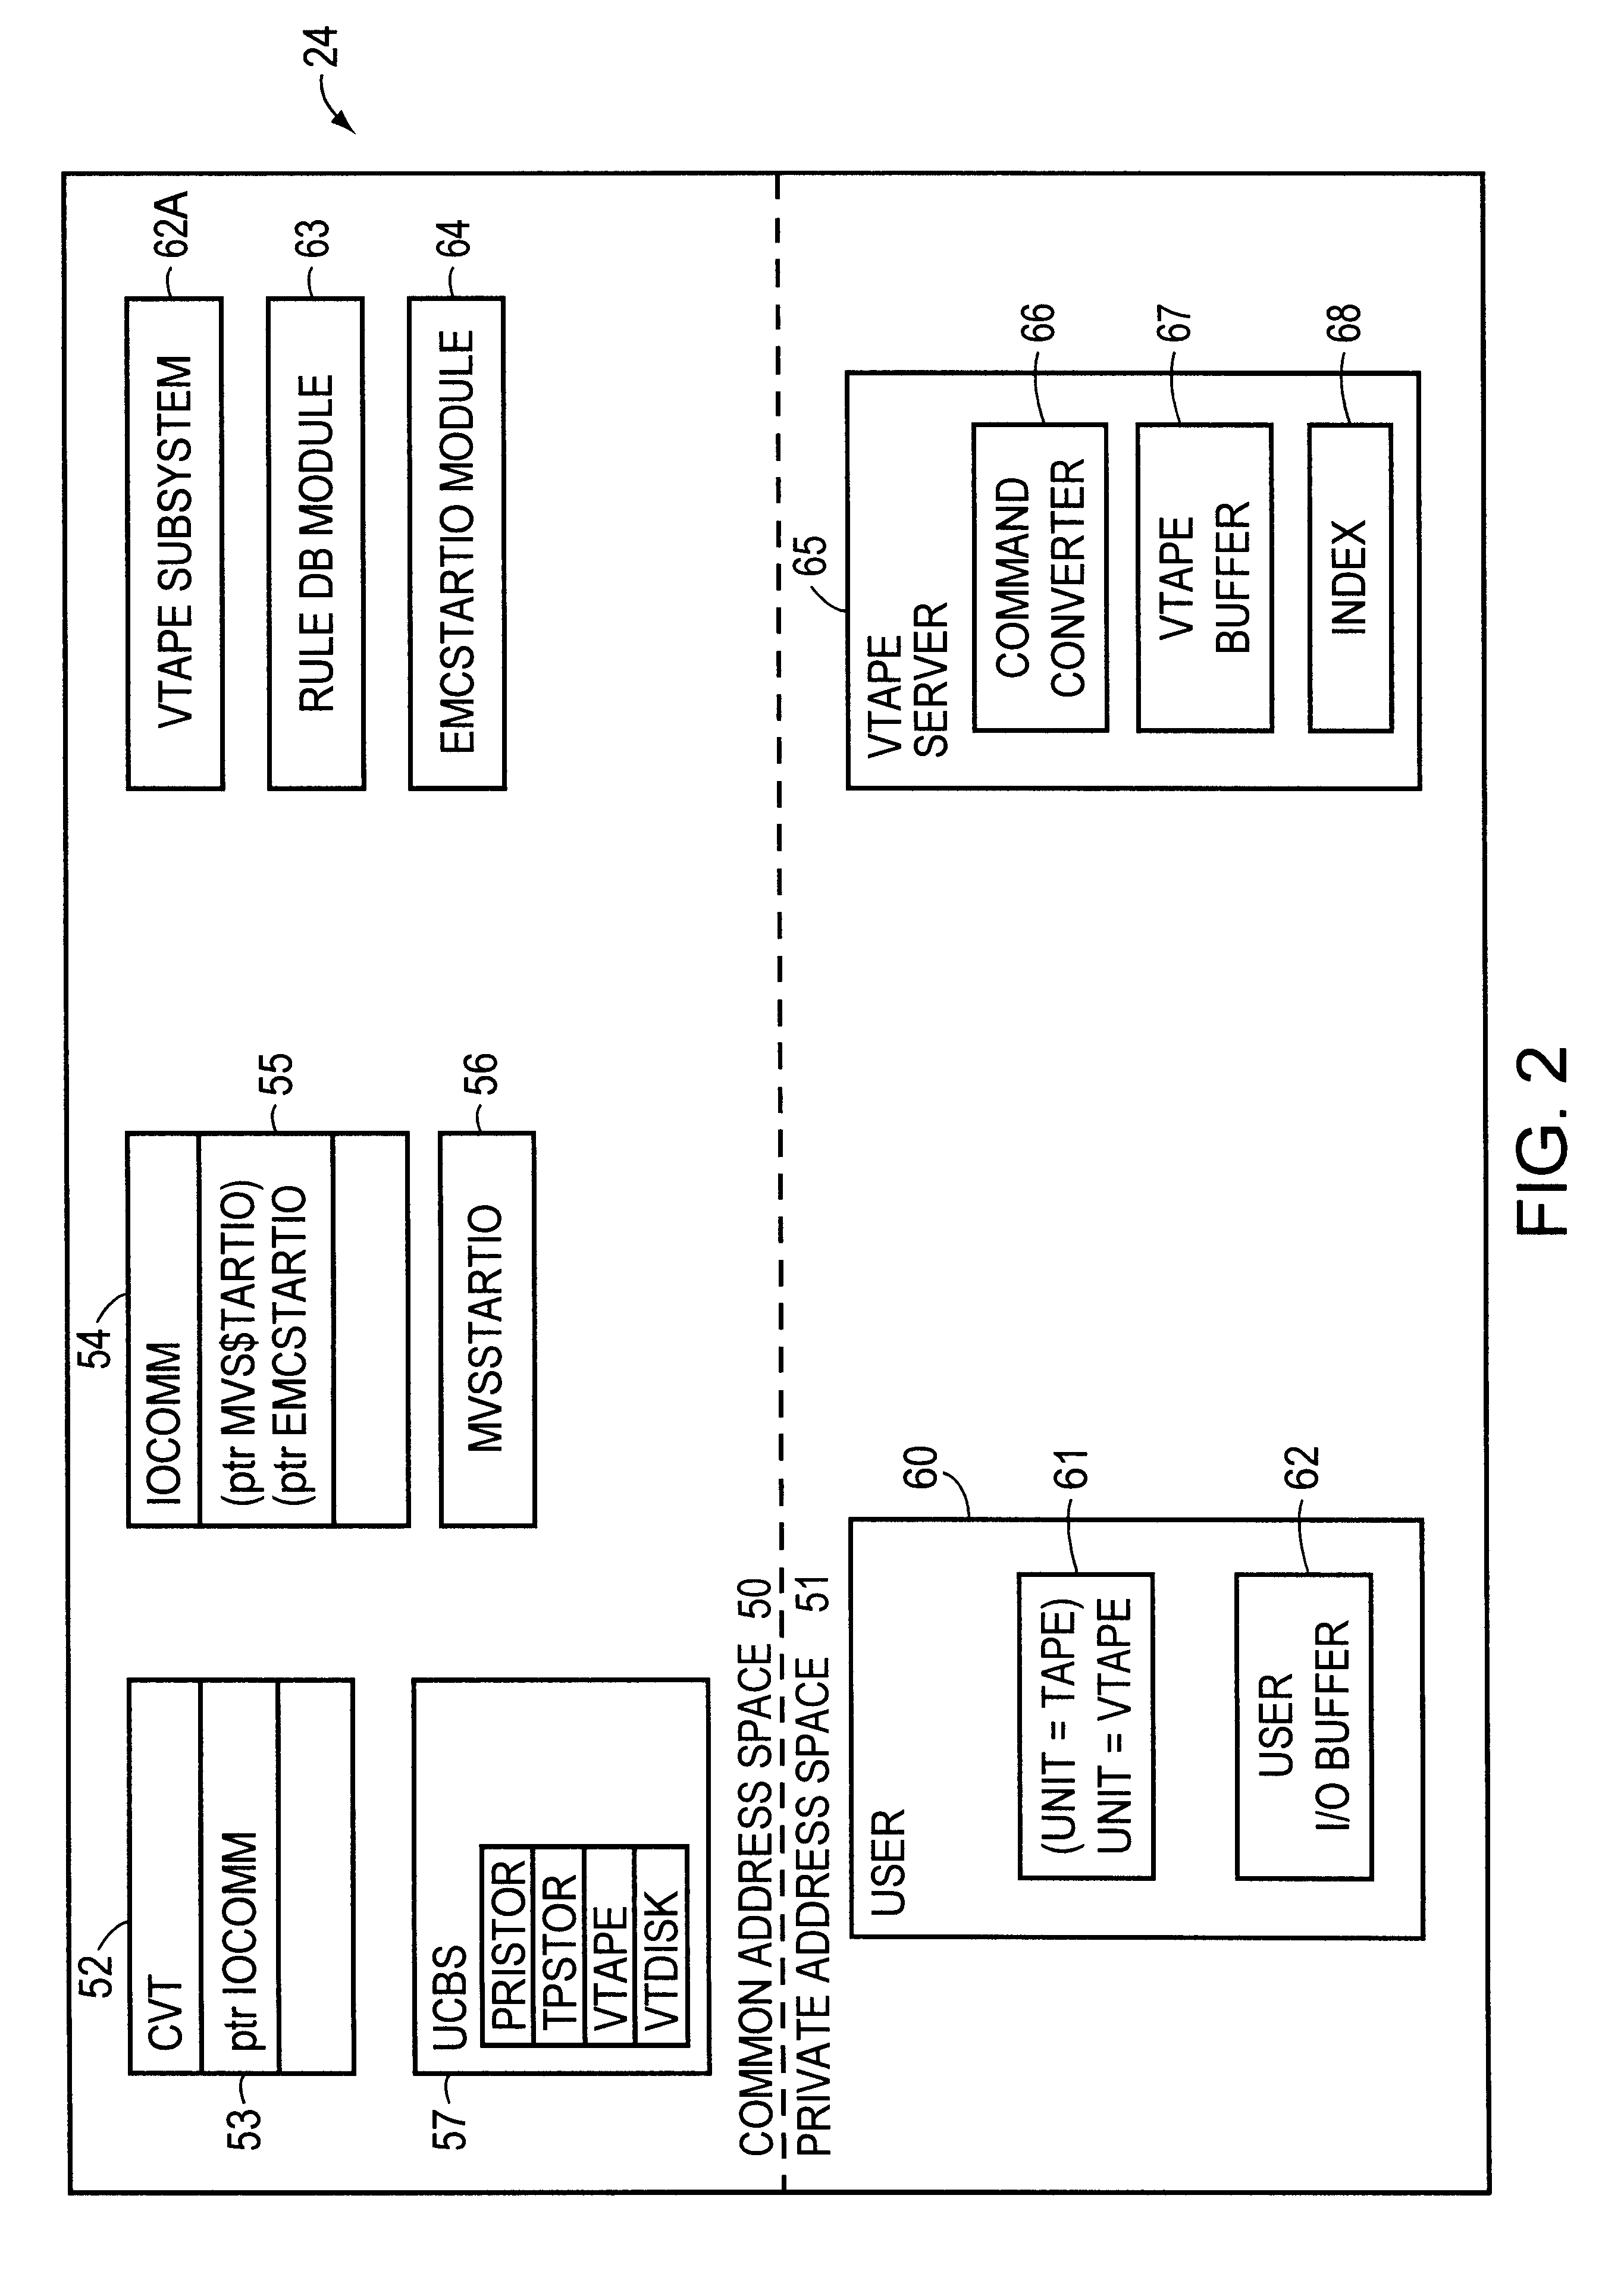 Virtual tape system with variable size